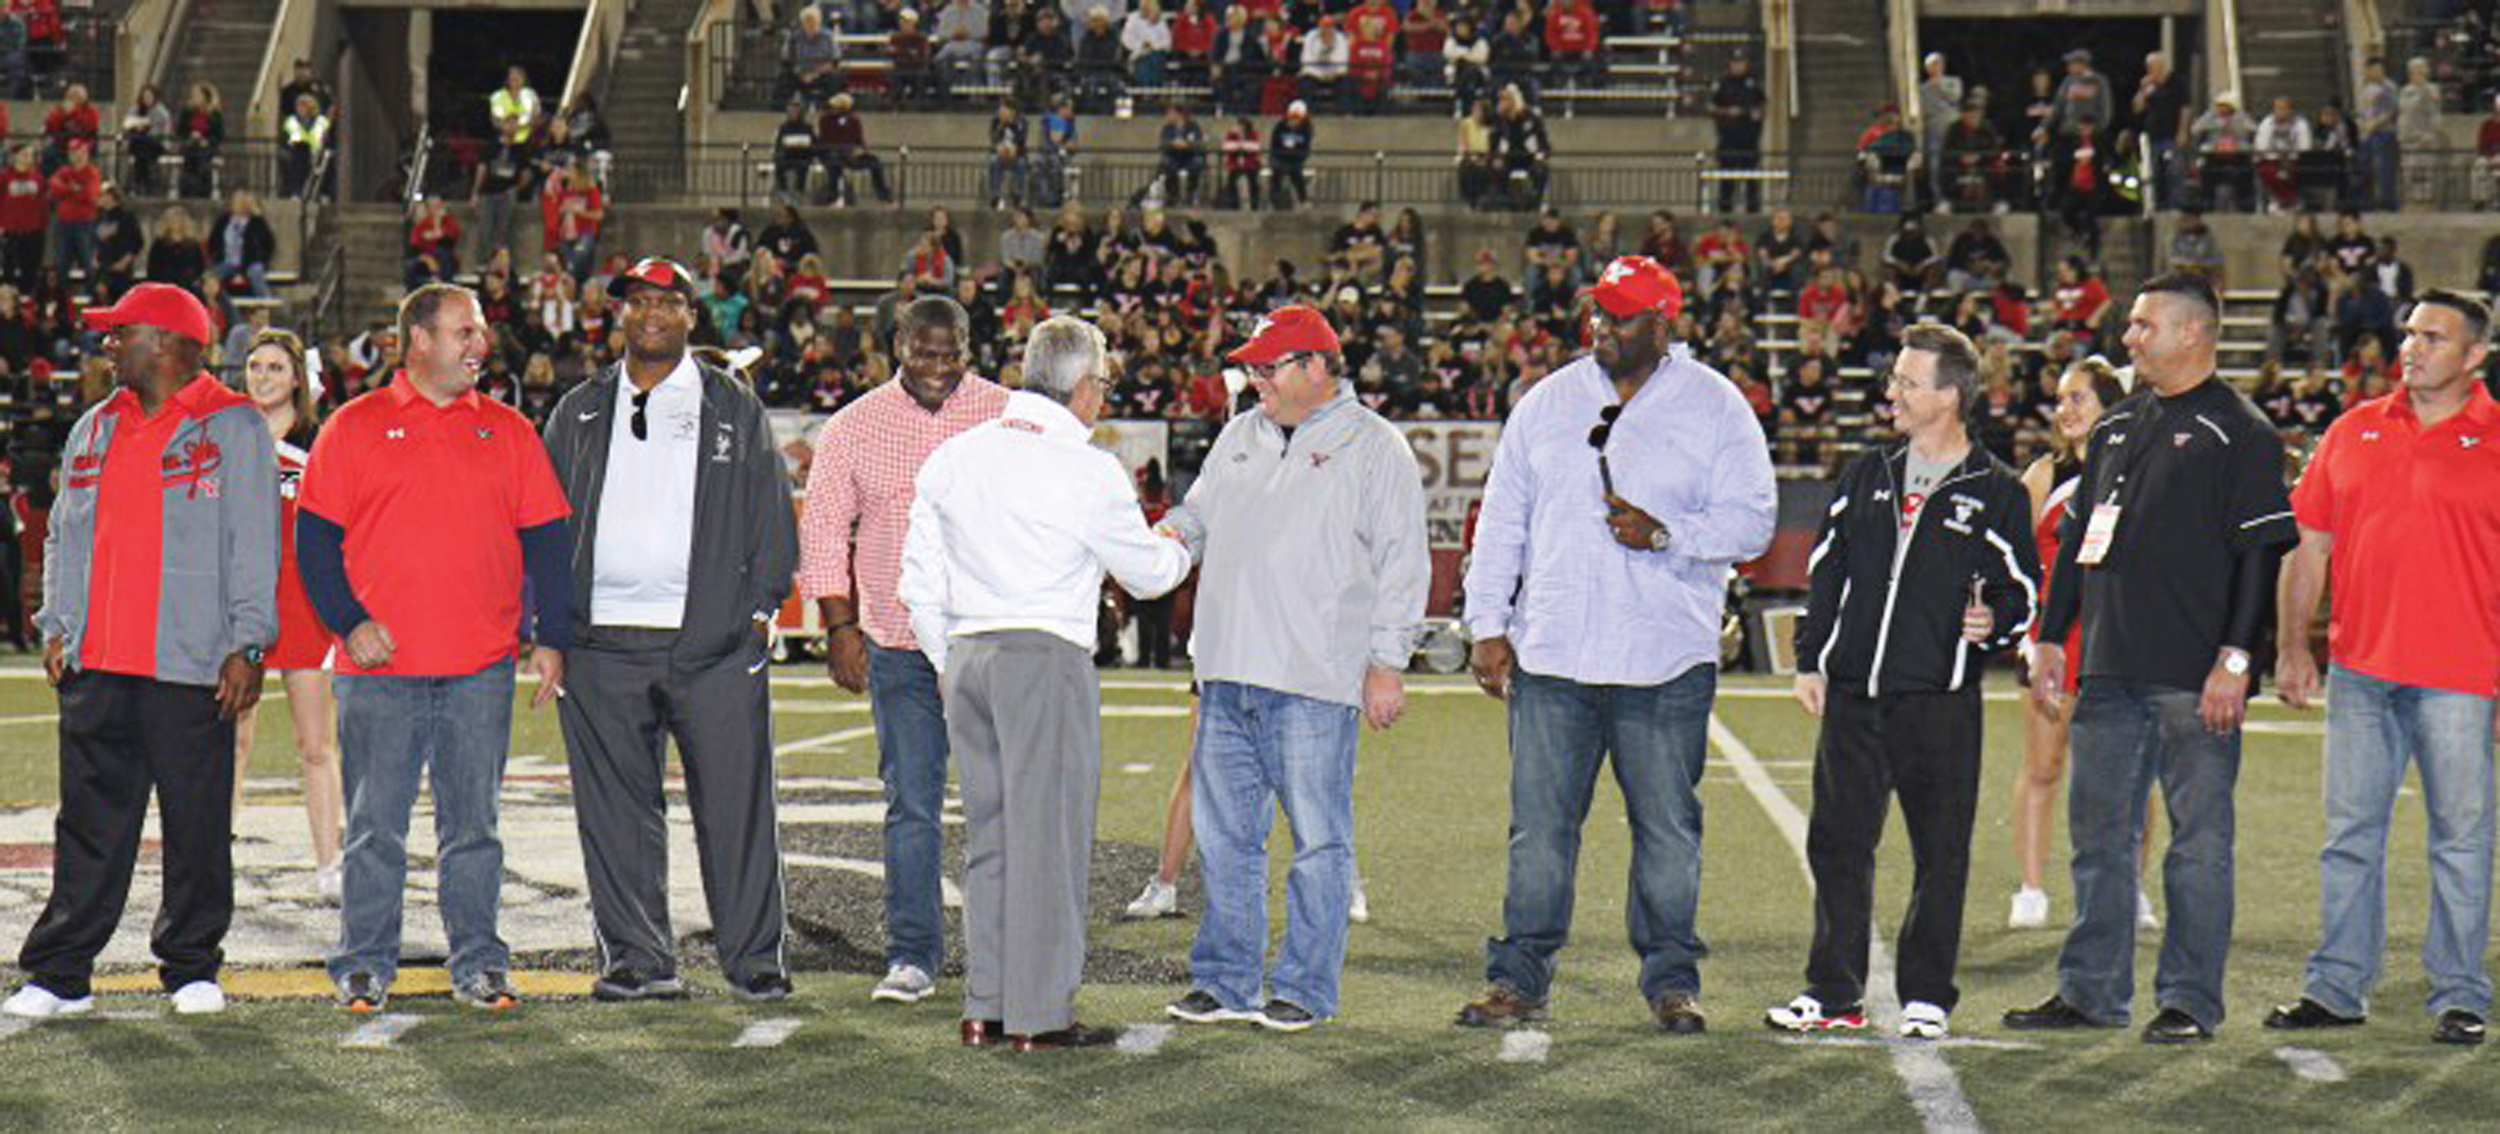 Members of the 1991 National Championship team at the 25th anniversary celebration in 2016.